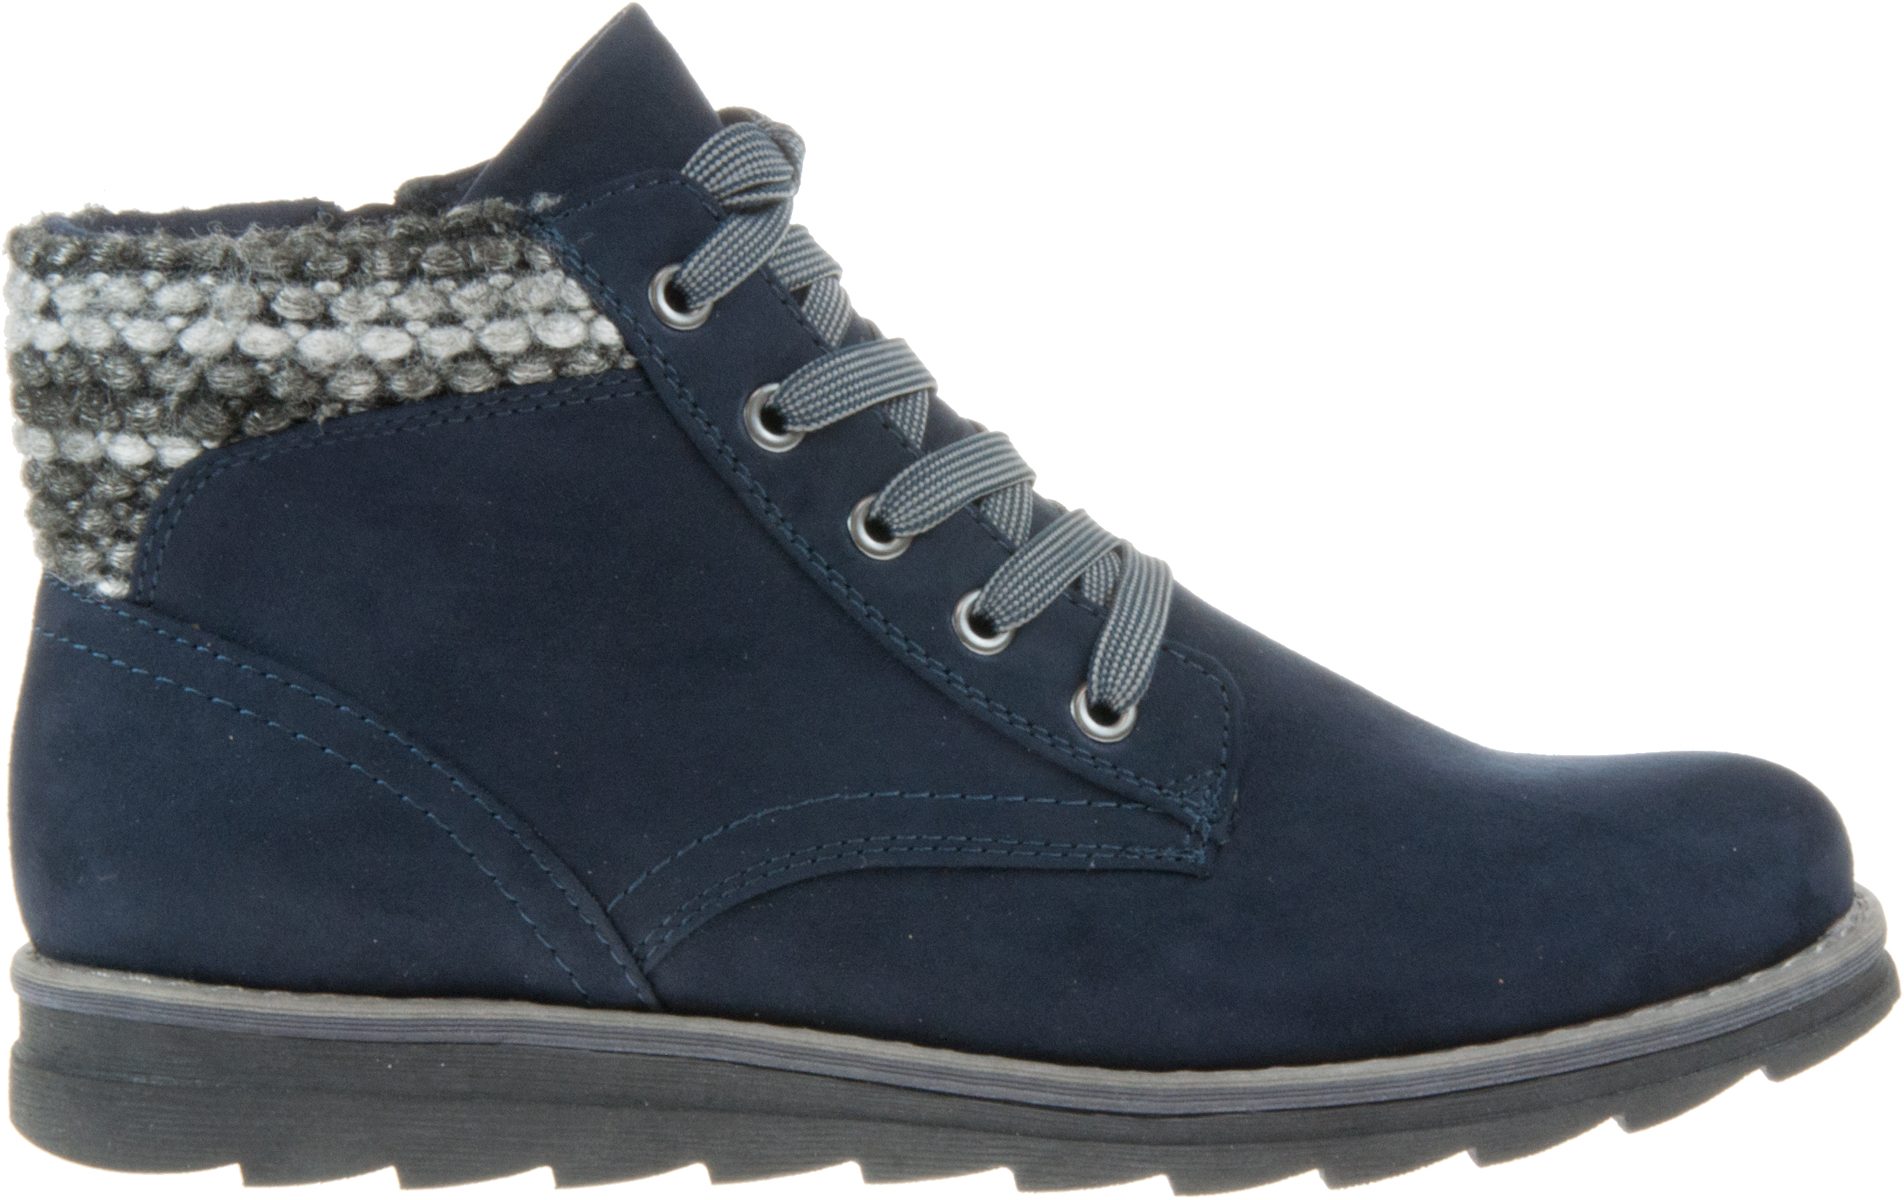 Marco Tozzi 25208-25 Dark Navy Combination 25208-25 888 - Ankle Boots ...